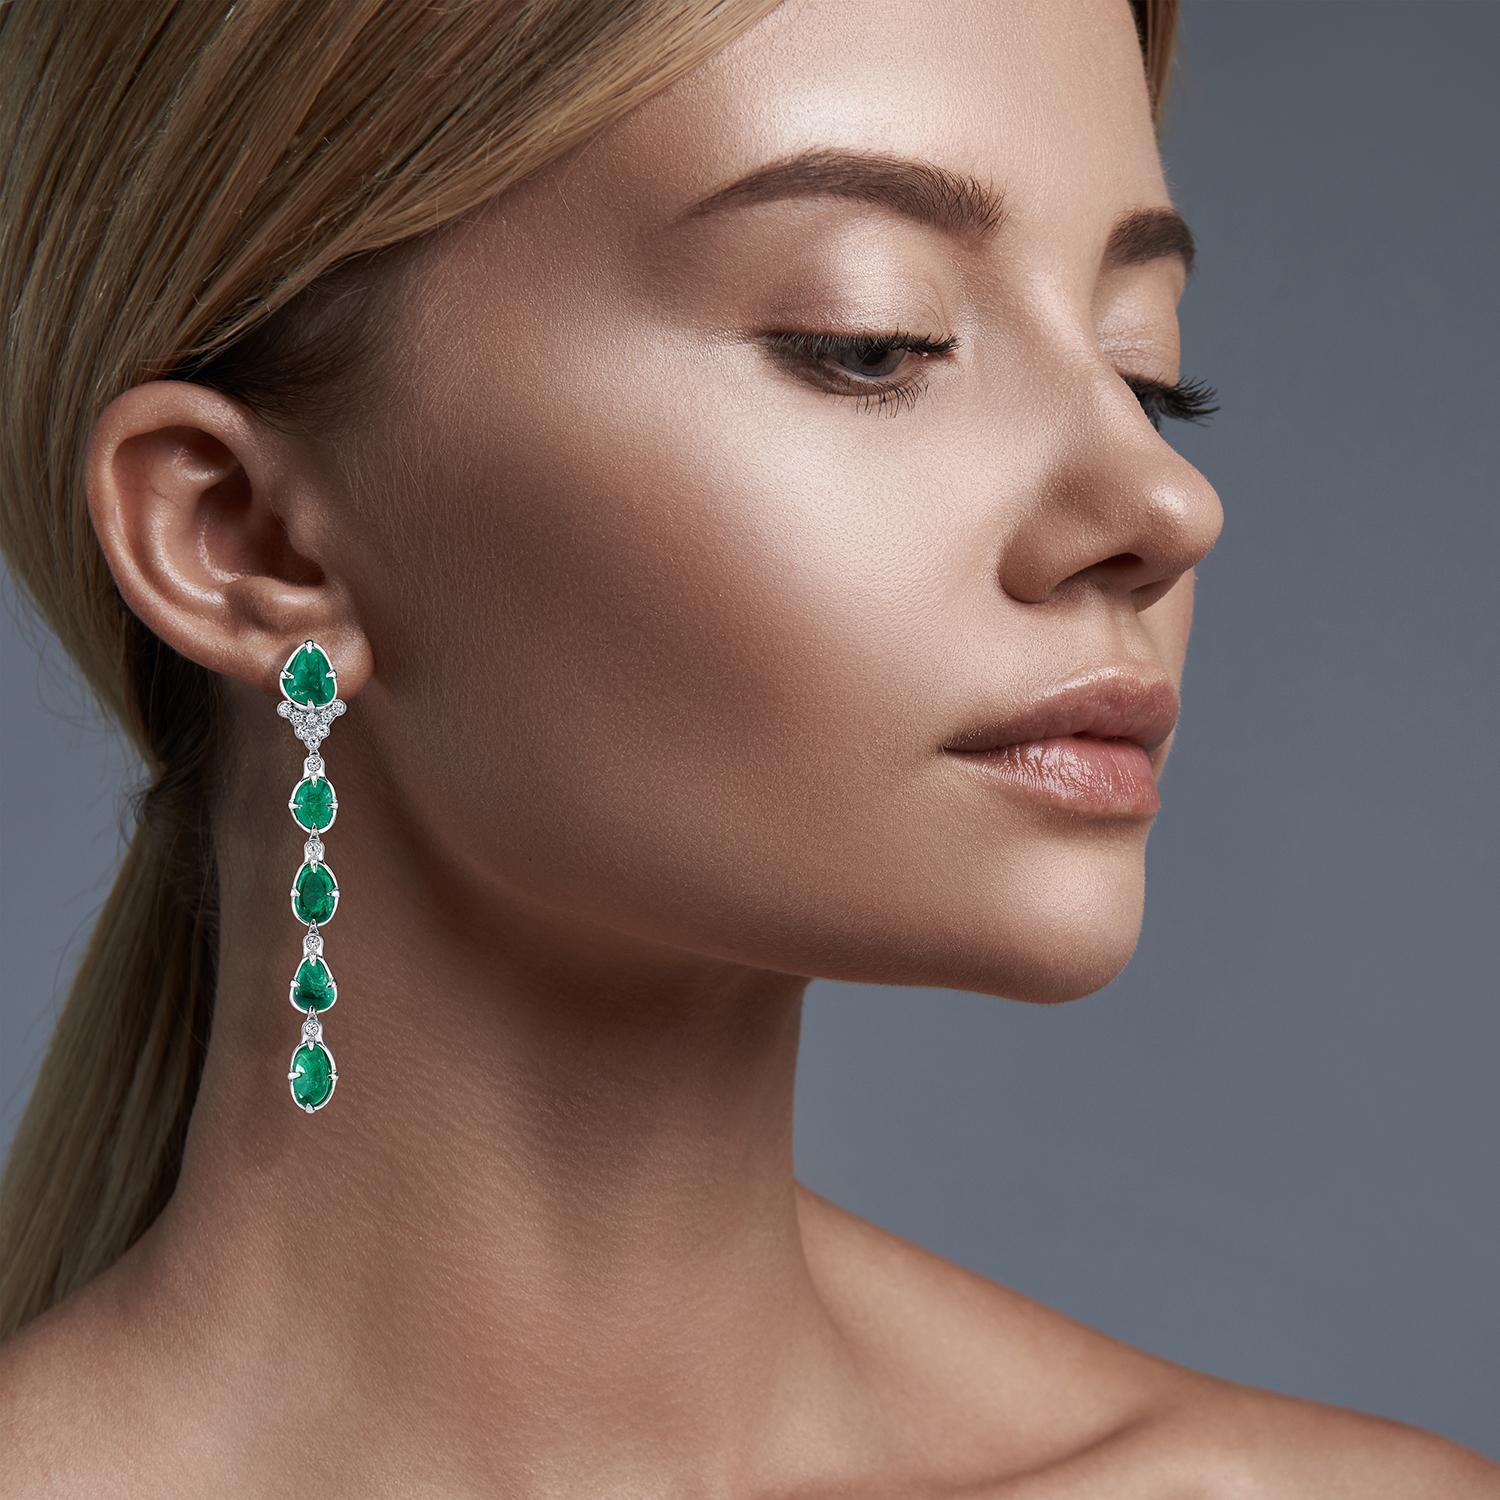 18 Karat white gold long drop claw setting earrings featuring Muzo Colombian emeralds weighing 27.39 carats and diamonds weighing 0.86 carats.

Muzo Emerald Colombia Heritage Muisca Earrings set with 27.39 carats Emerald.

Named in honor of the